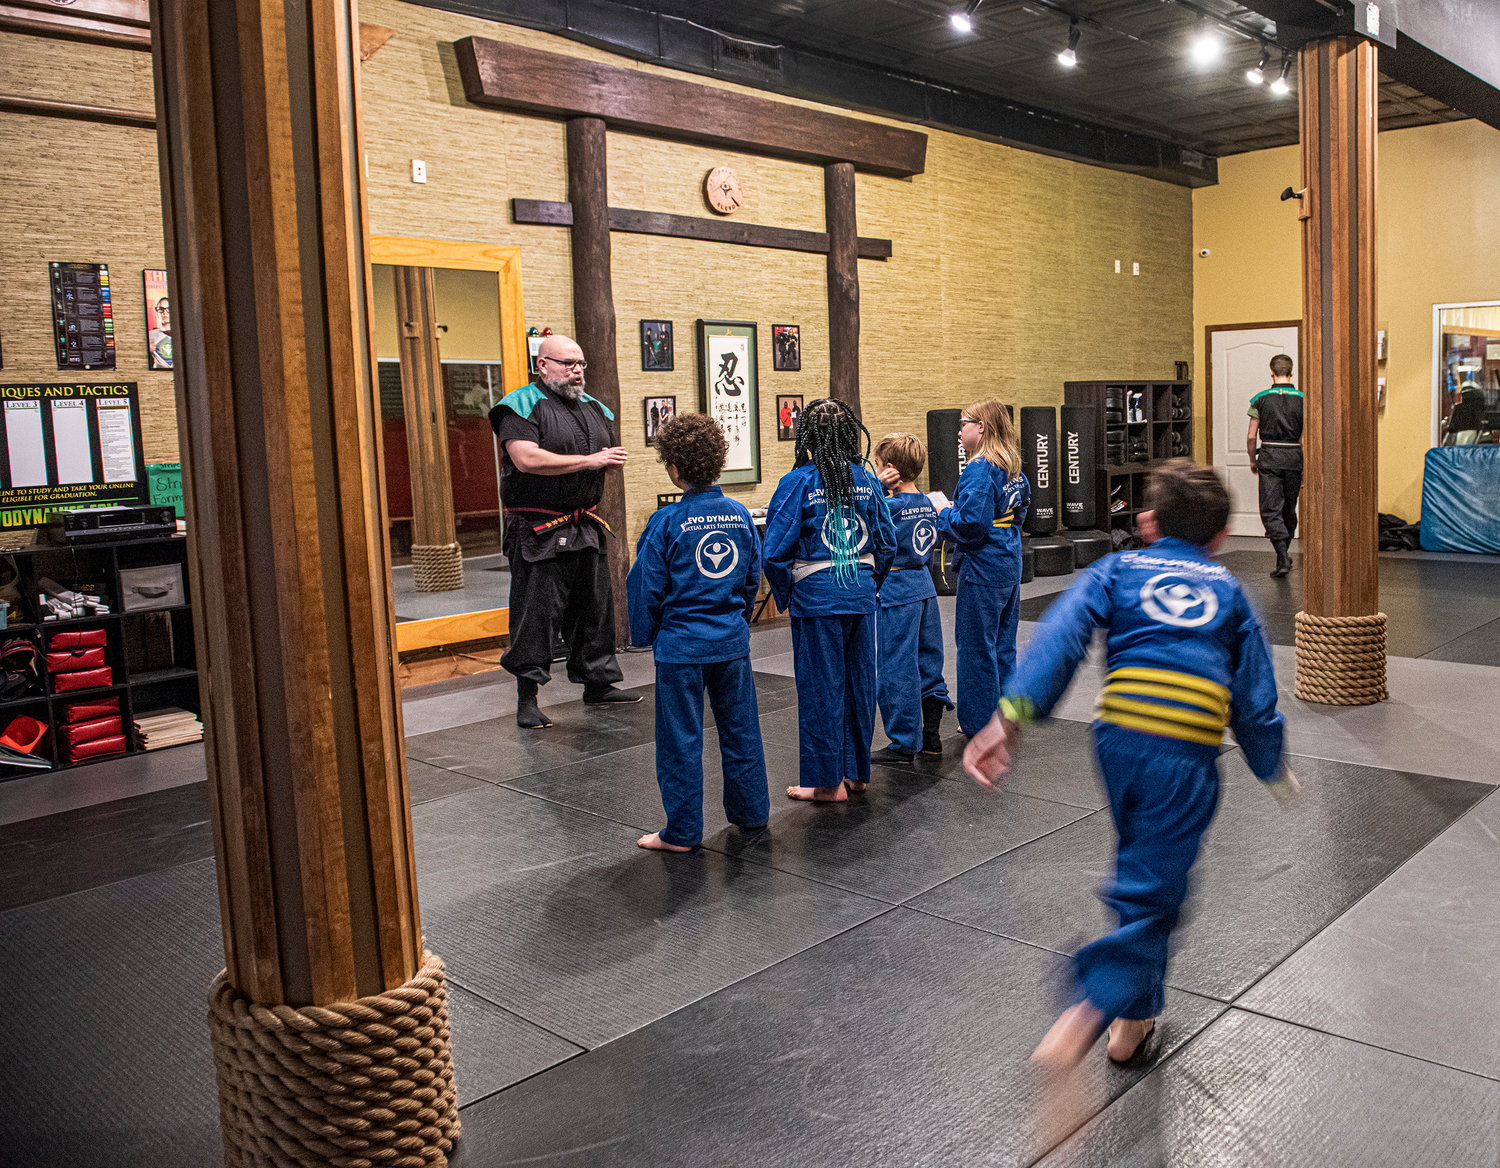 Instructor Robert Albert at Elevo Dynamics on Person Street works with youth ages 4 and older on Ninjutsu, an ancient Japanese martial art which prizes mental, emotional and physical strength.